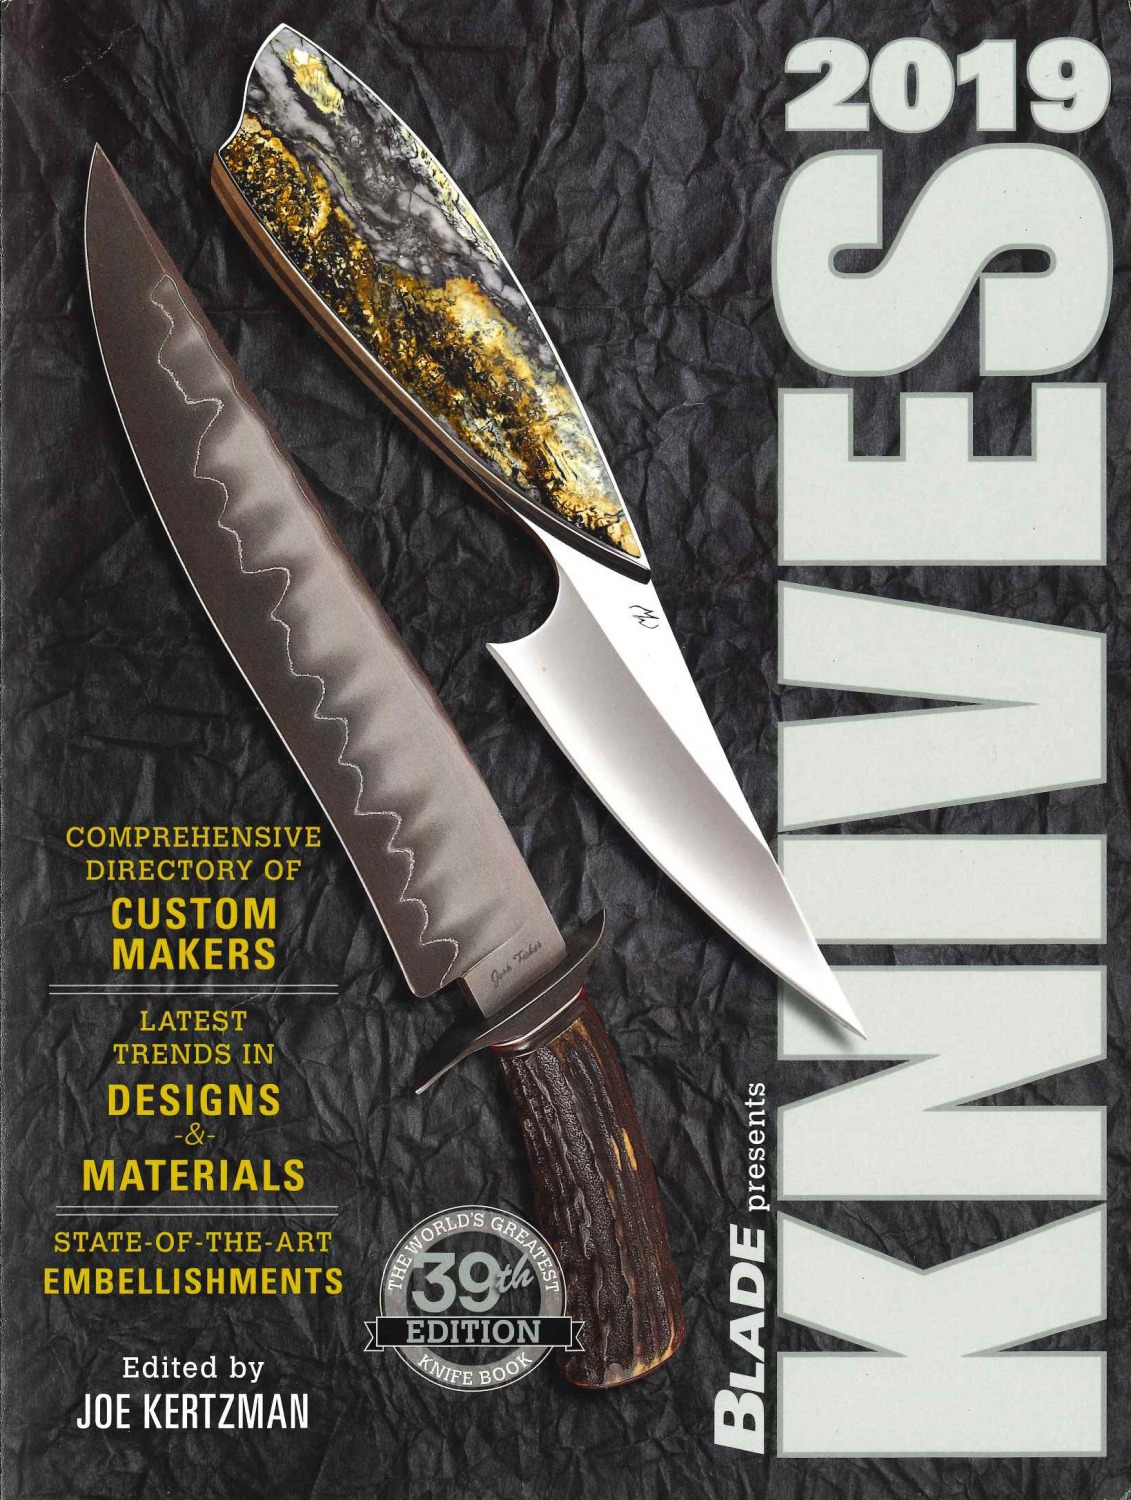 book_collection_knives2019